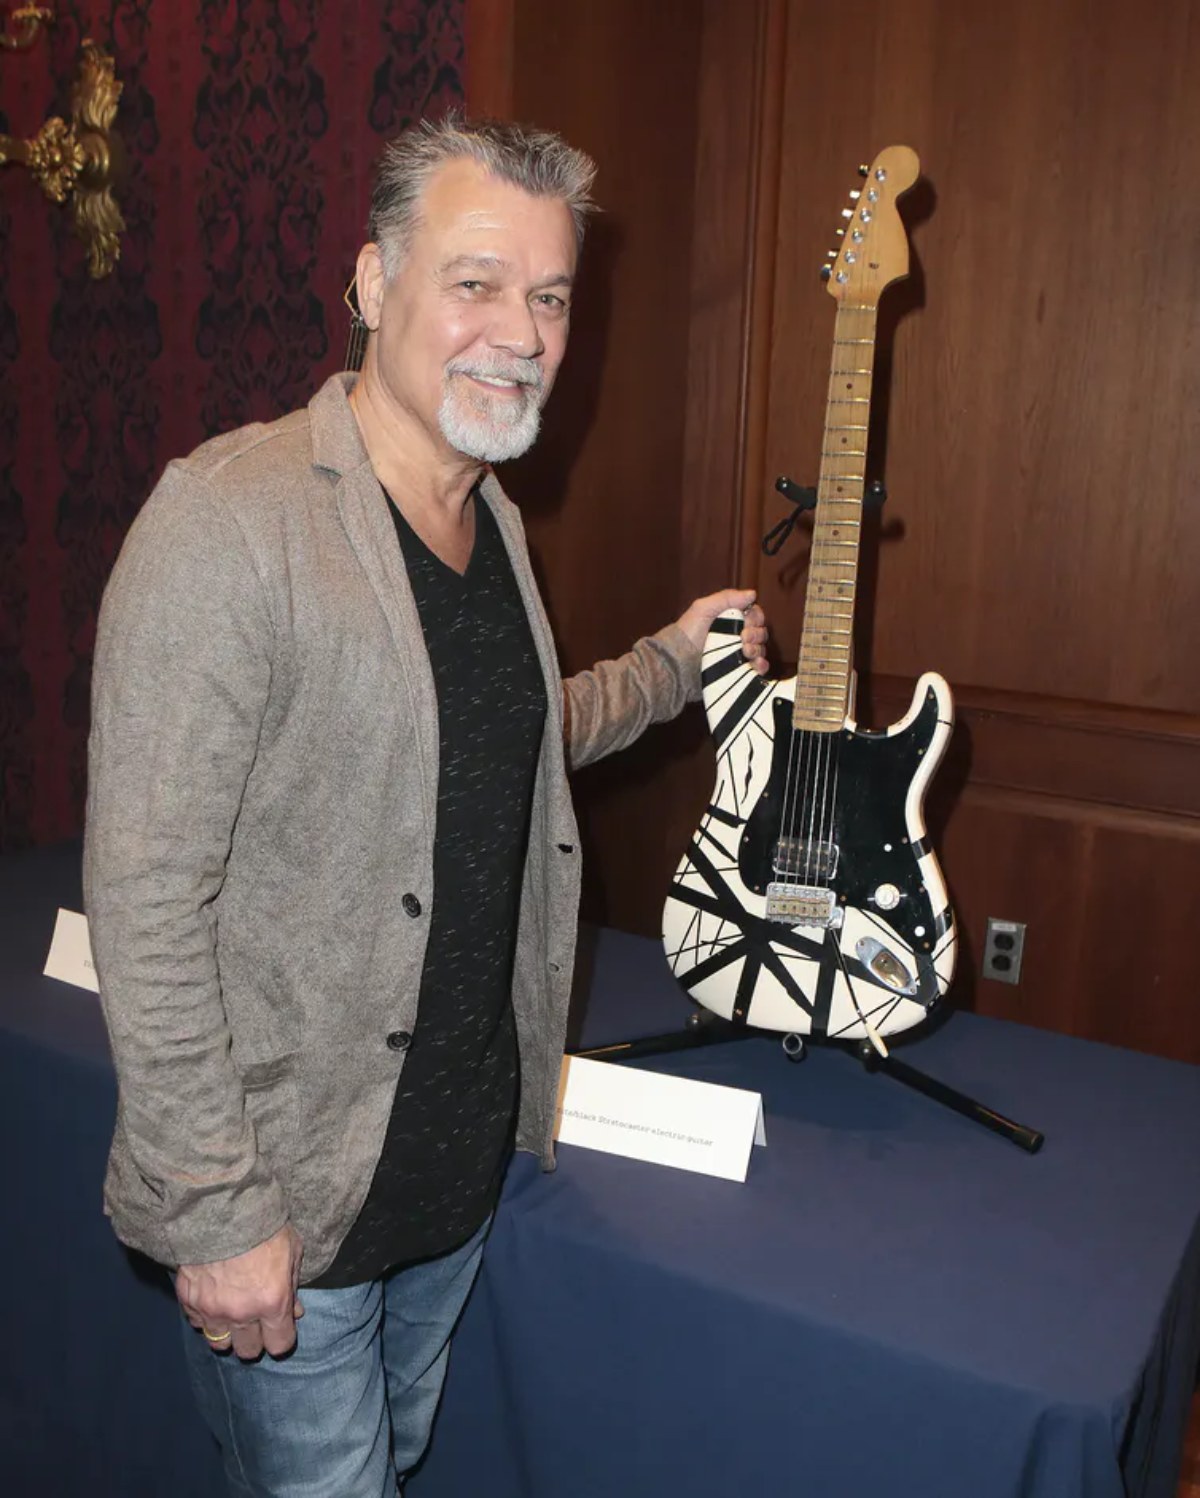 Van Halen poses with his "Frankenstein guitar" on display at the Smithsonian's National Museum of American History in 2015